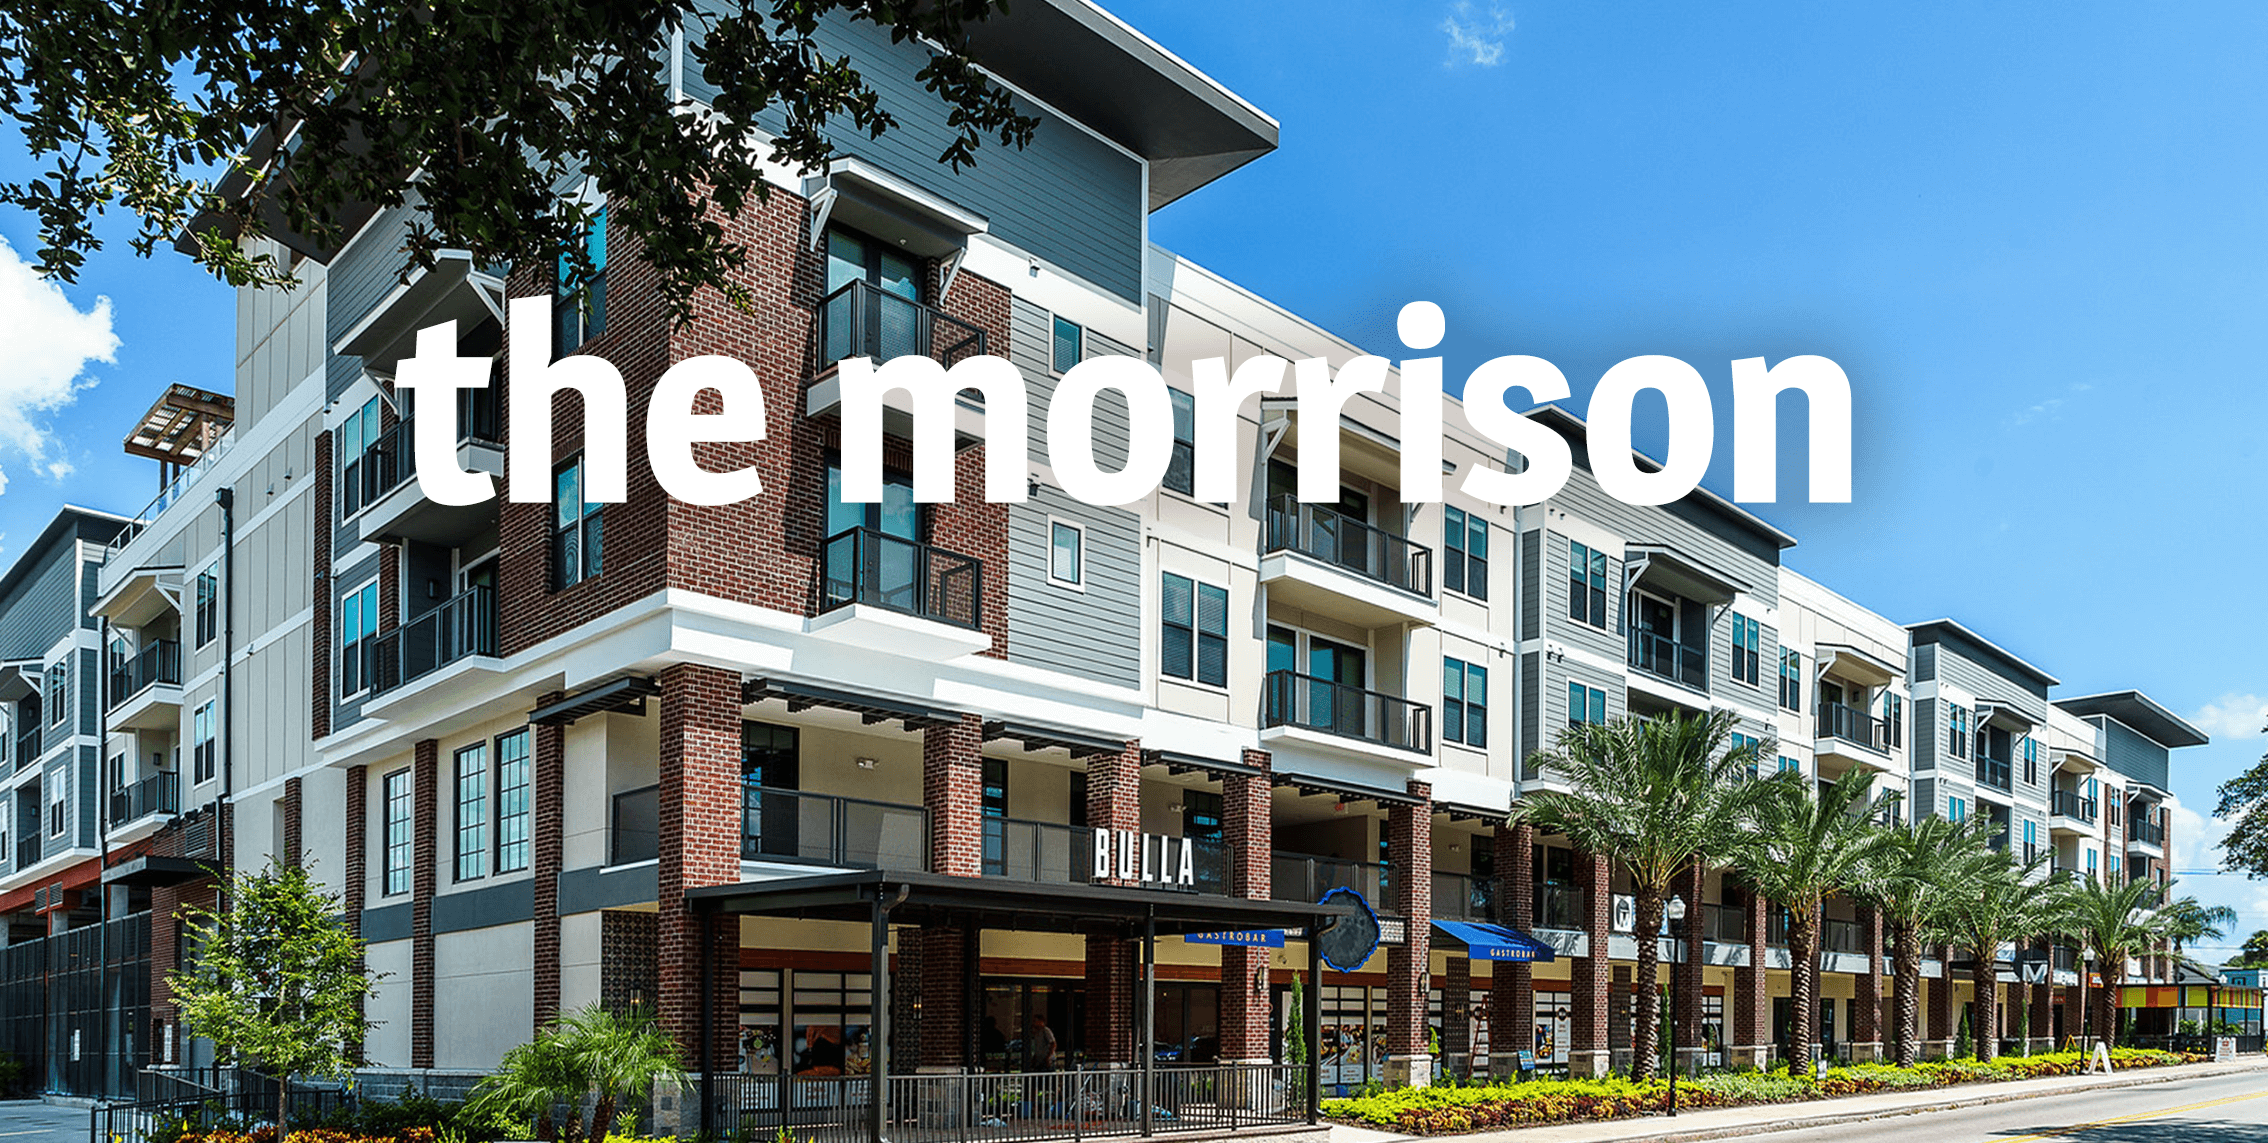 The Morrison, a mixed-use lifestyle development on the trendy Howard Avenue, officially opened September 7, 2017.